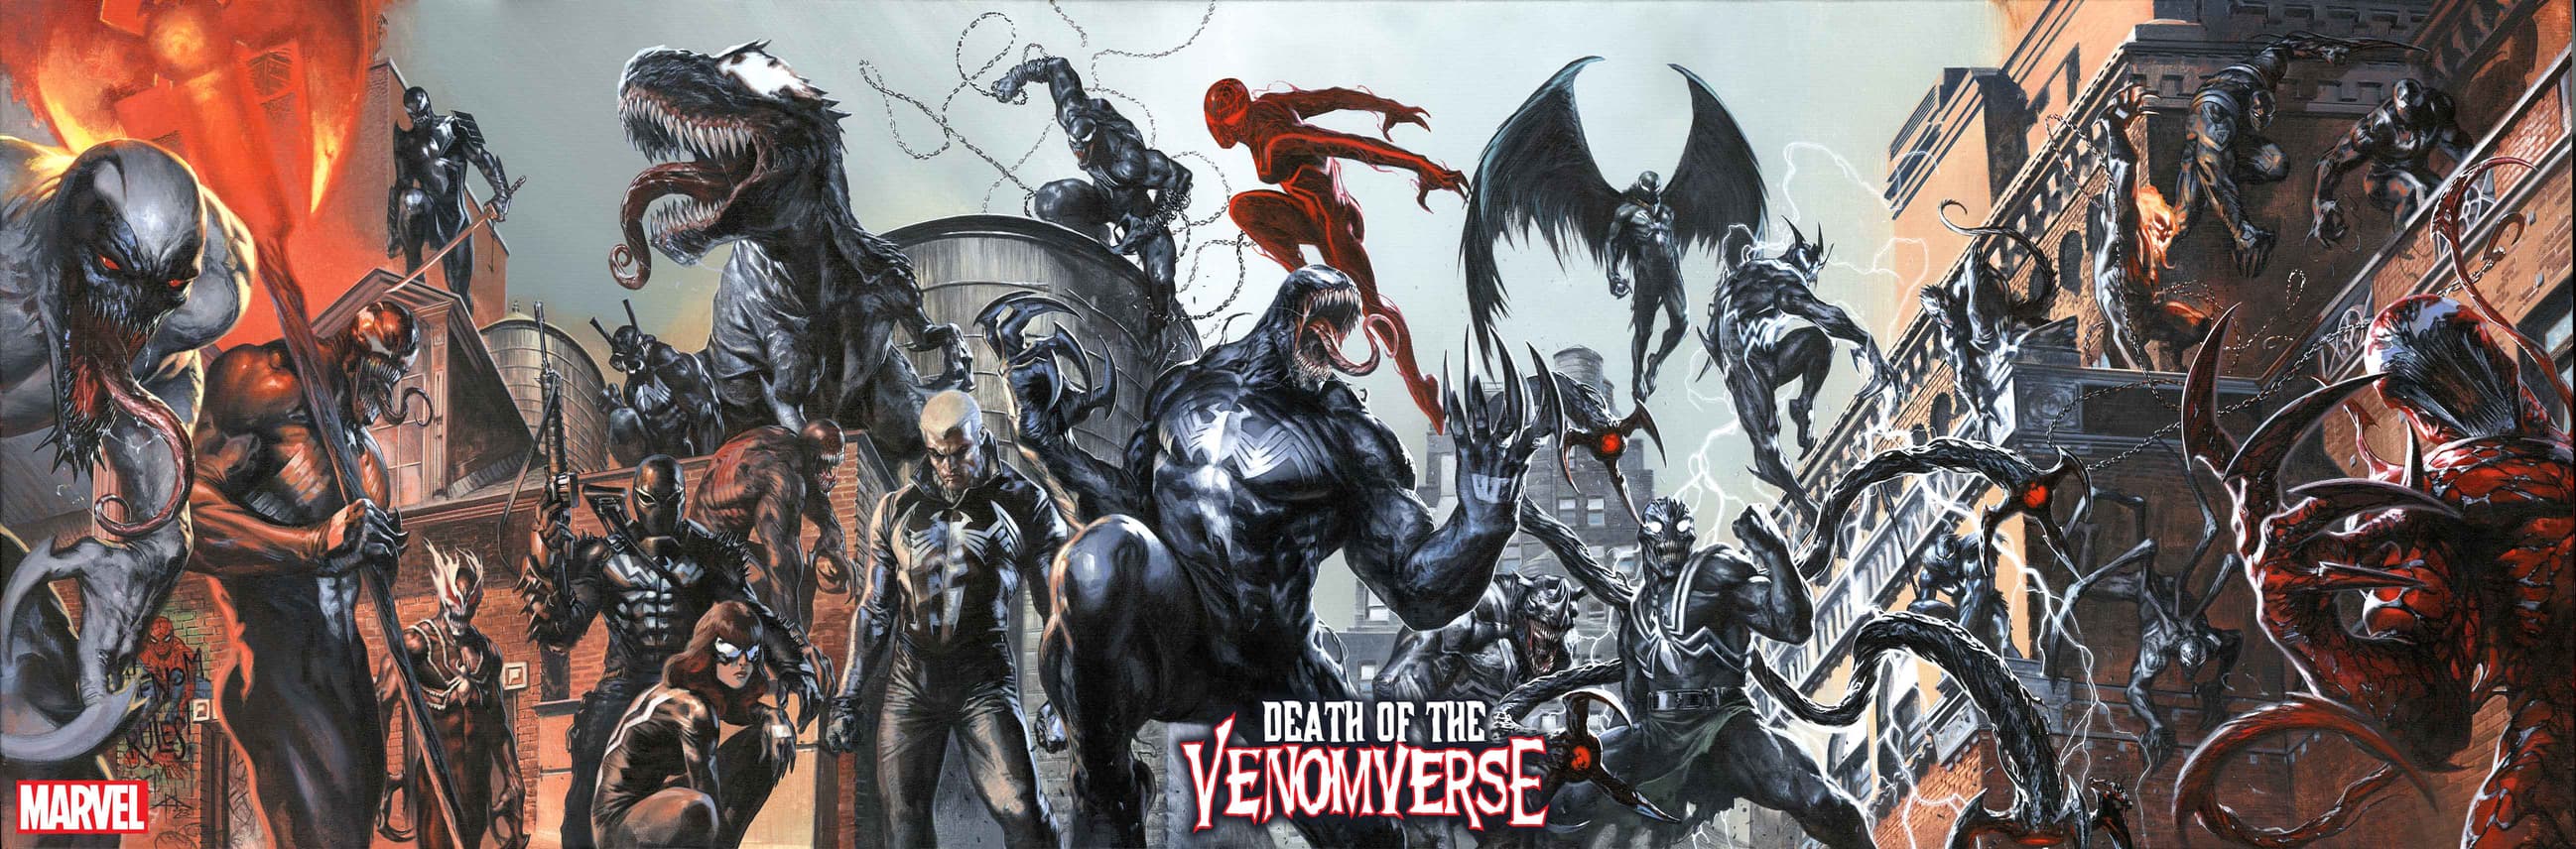 DEATH OF THE VENOMVERSE Connecting Covers by Gabriele Dell'Otto